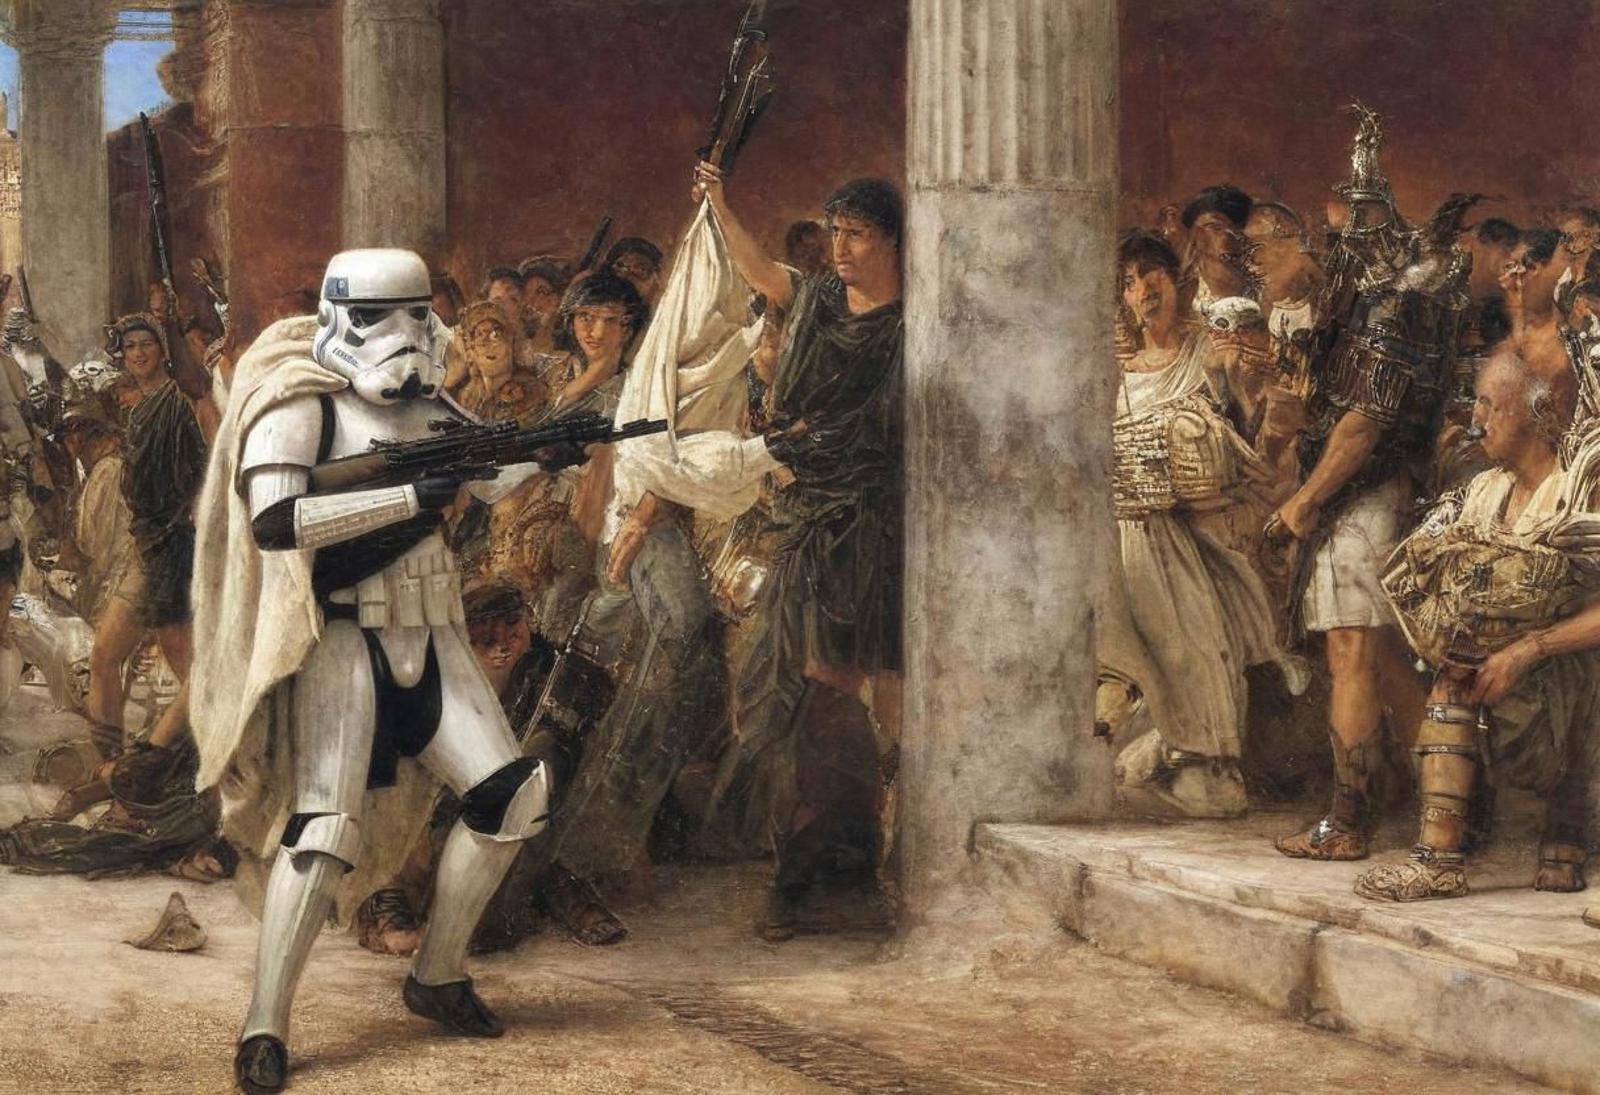 A Stormtrooper from Star Wars is holding a gun and standing near a crowd of people.